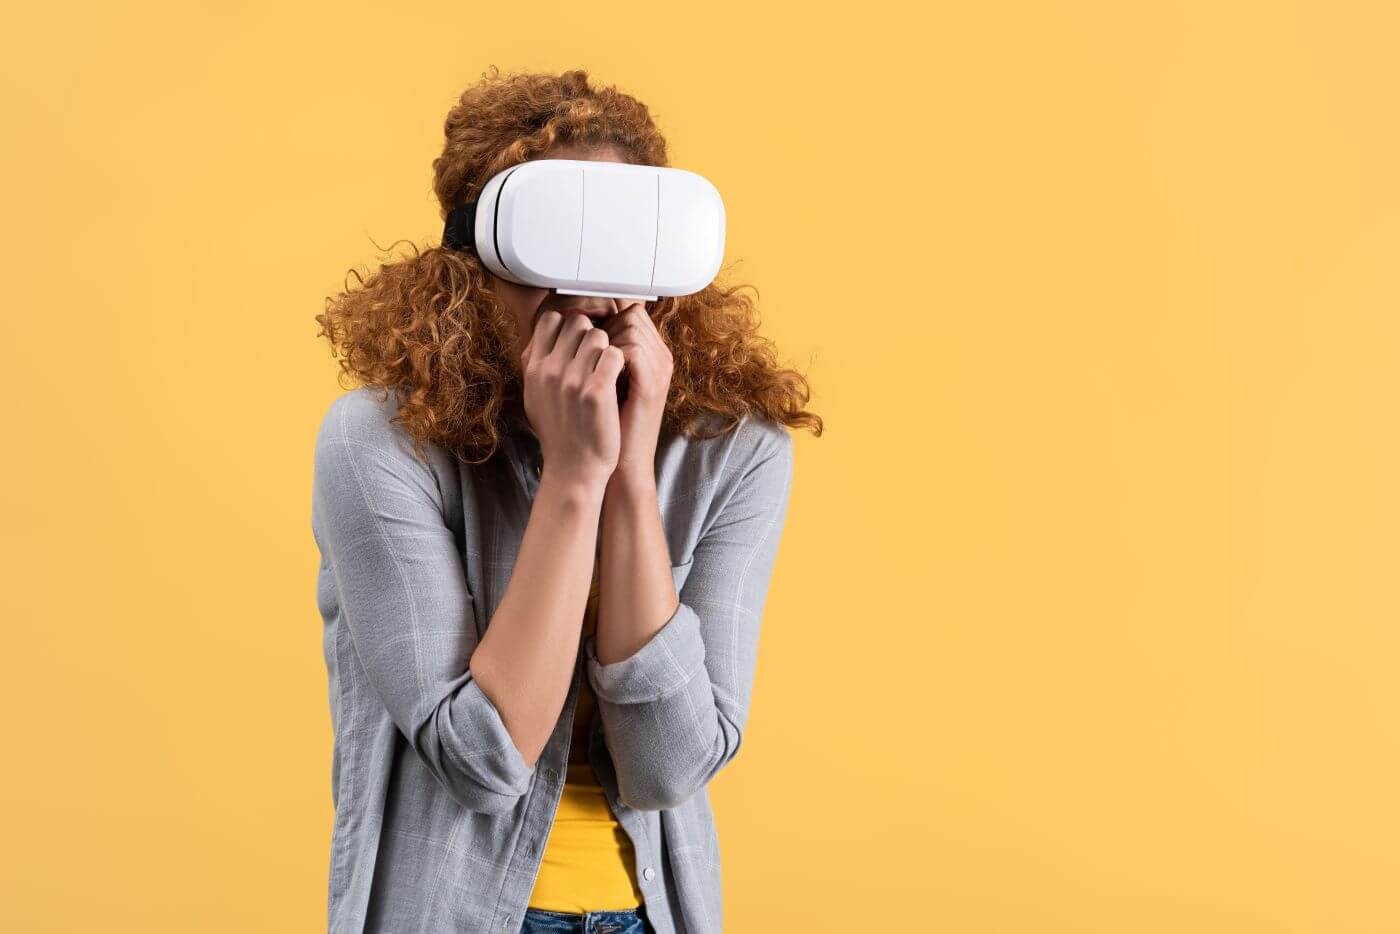 Oxford VR White Paper Shows the Effectiveness of Gamified VR Therapy in Mental Health Treatment